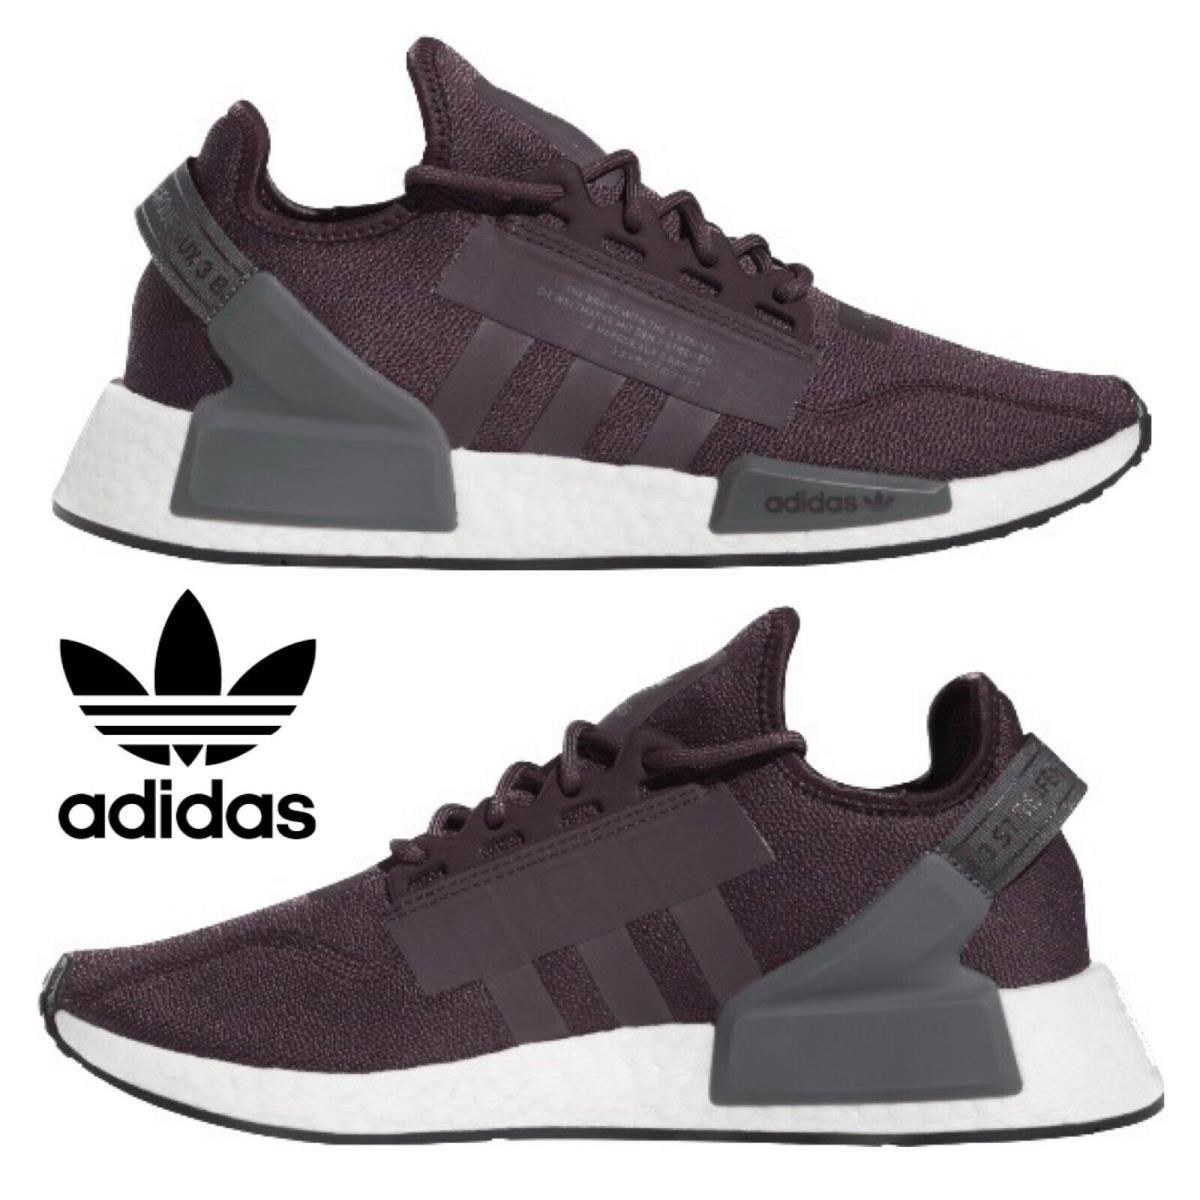 Adidas Originals Nmd V2 Men`s Sneakers Running Shoes Gym Casual Sport Burgundy - Maroon , Maroon/Grey Manufacturer